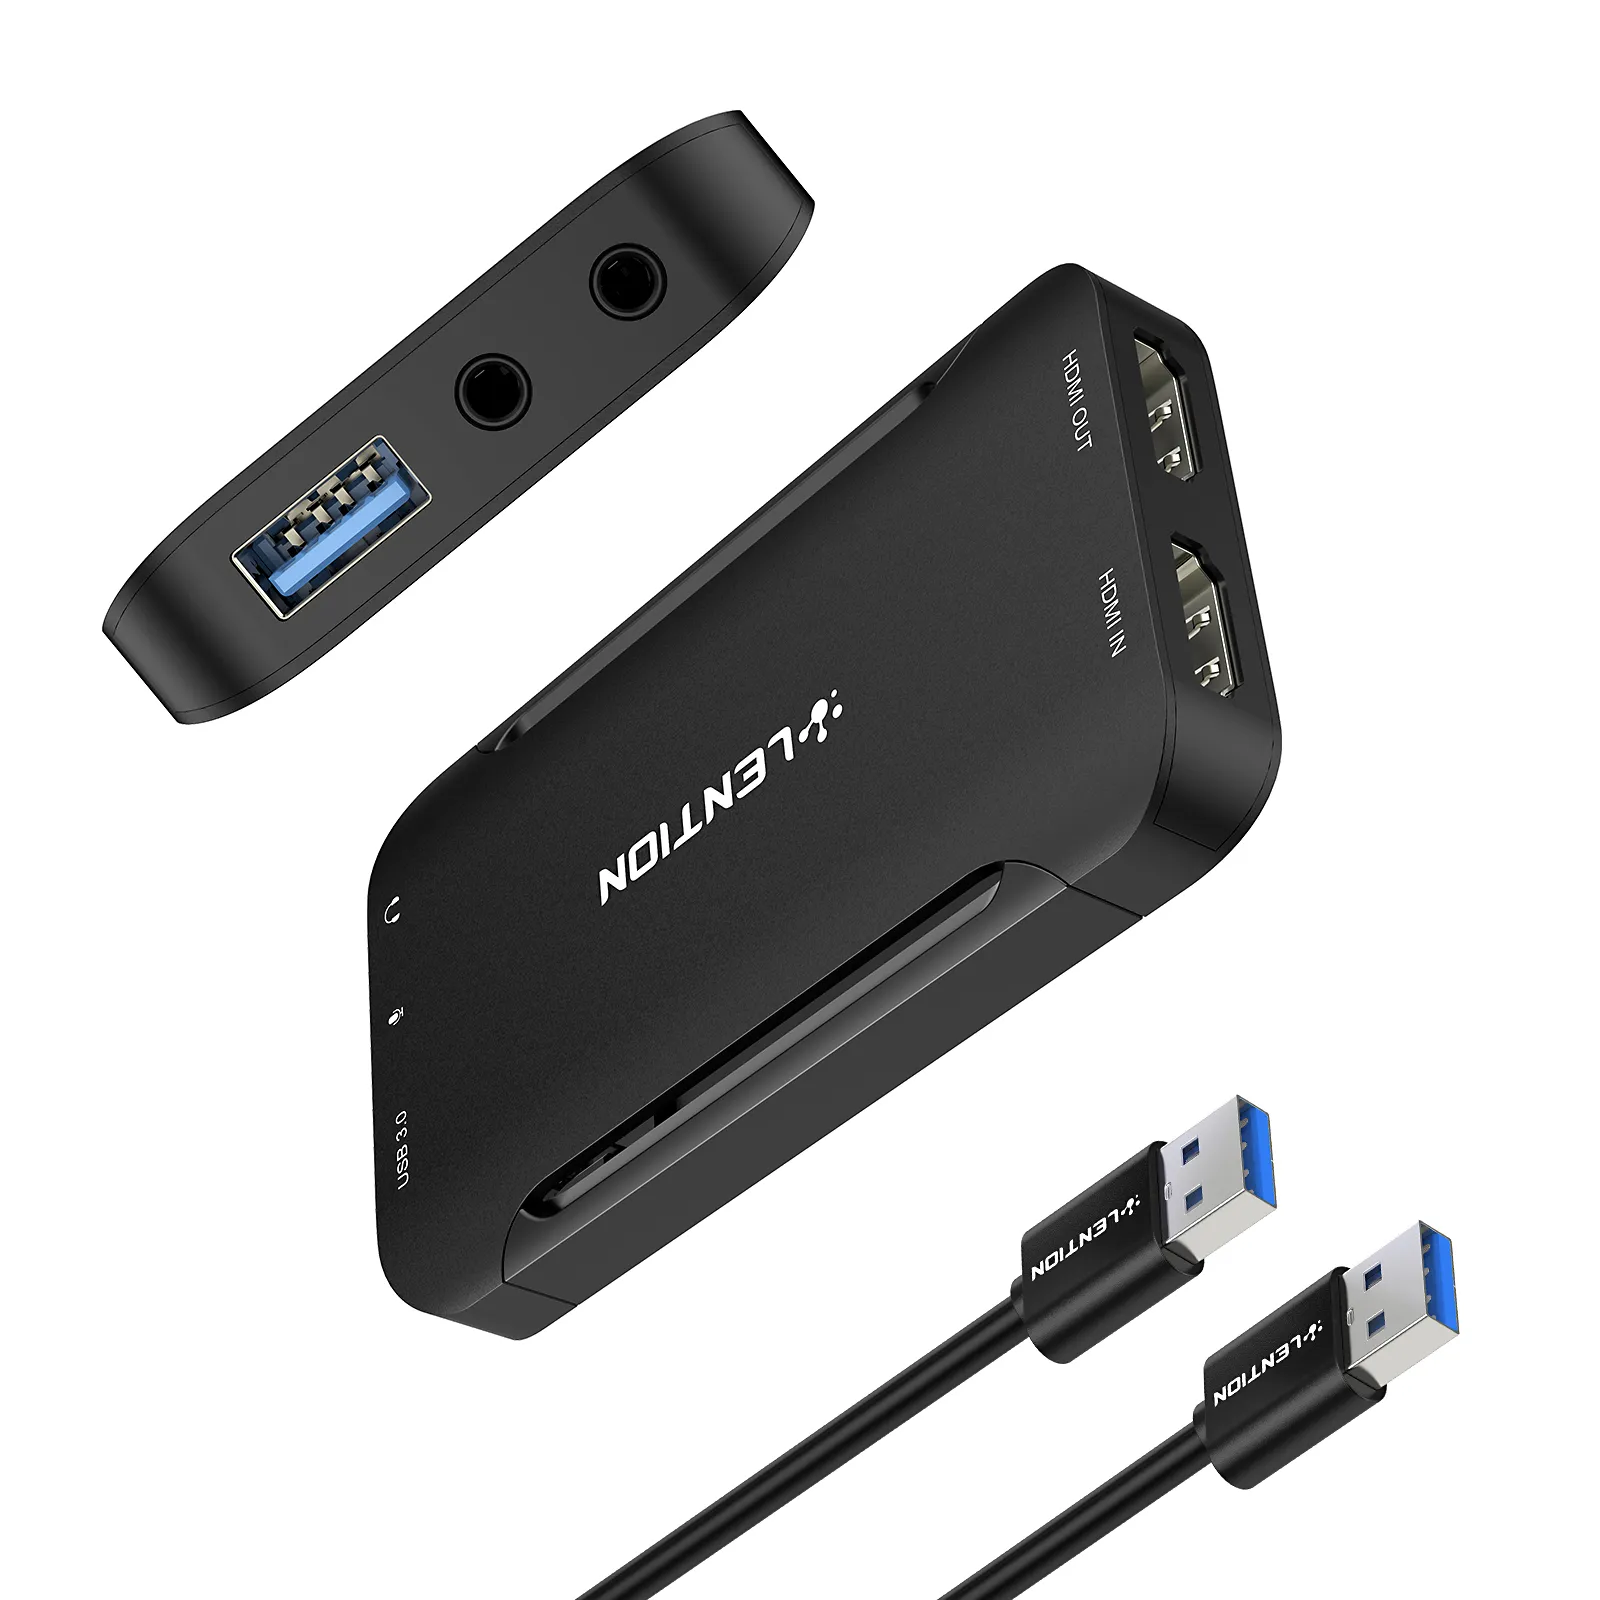 Lention USB 3.0 HDMI Video Capture Card, 1080p60 HD Video Streaming and Game Capture, HDMI PACTHROUGH, Arbeta med OBS, Xbox, PS4, Switch, Gaming, Recording